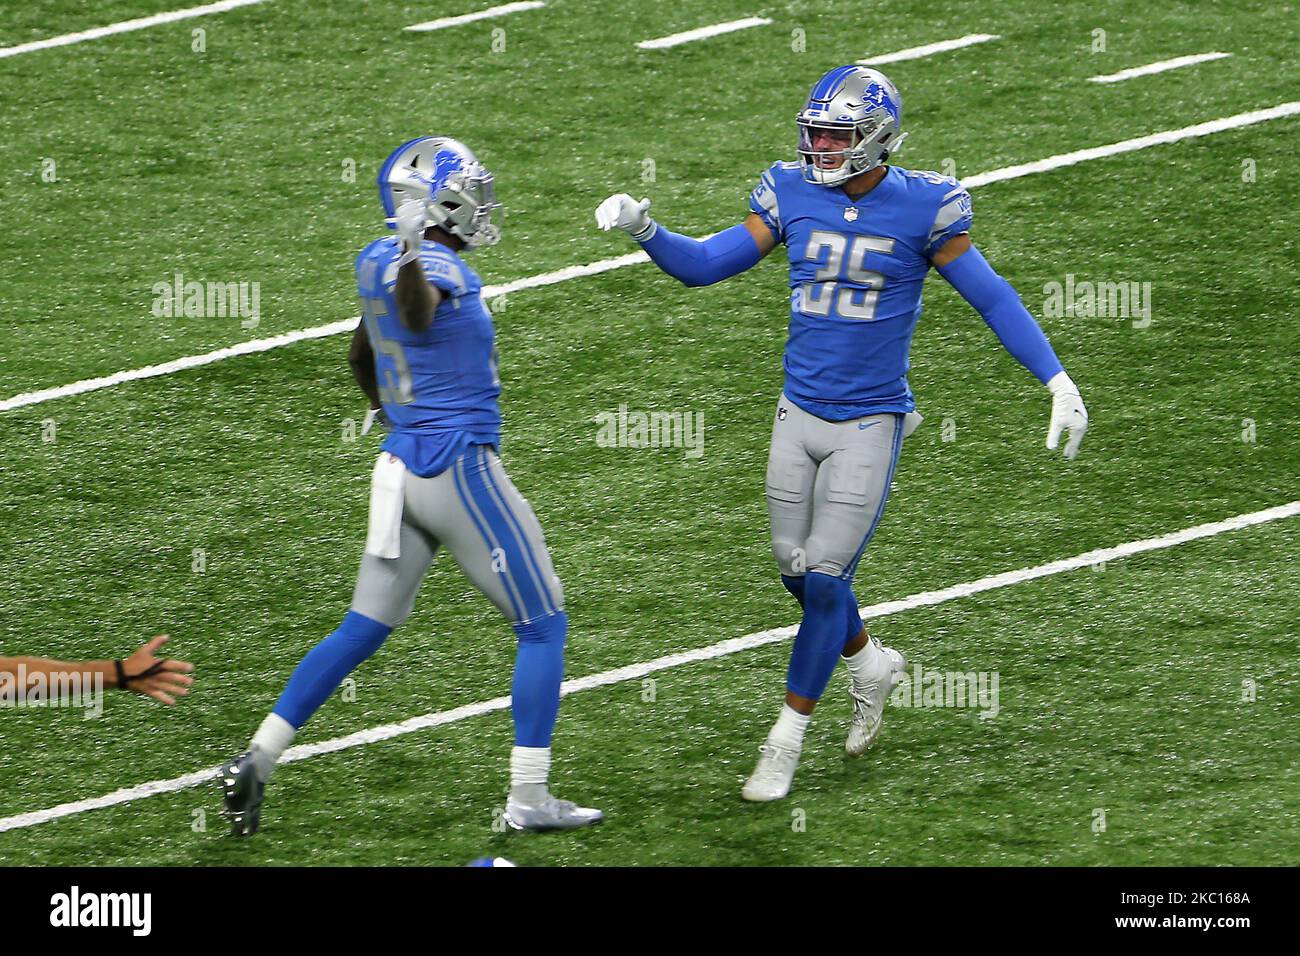 Detroit Lions safety Miles Killebrew (35) is congratulated by Detroit Lions free safety Will Harris (25) after a play during the first half of an NFL football game against the New Orleans Saints in Detroit, Michigan USA, on Sunday, October 4, 2020. (Photo by Amy Lemus/NurPhoto) Stock Photo